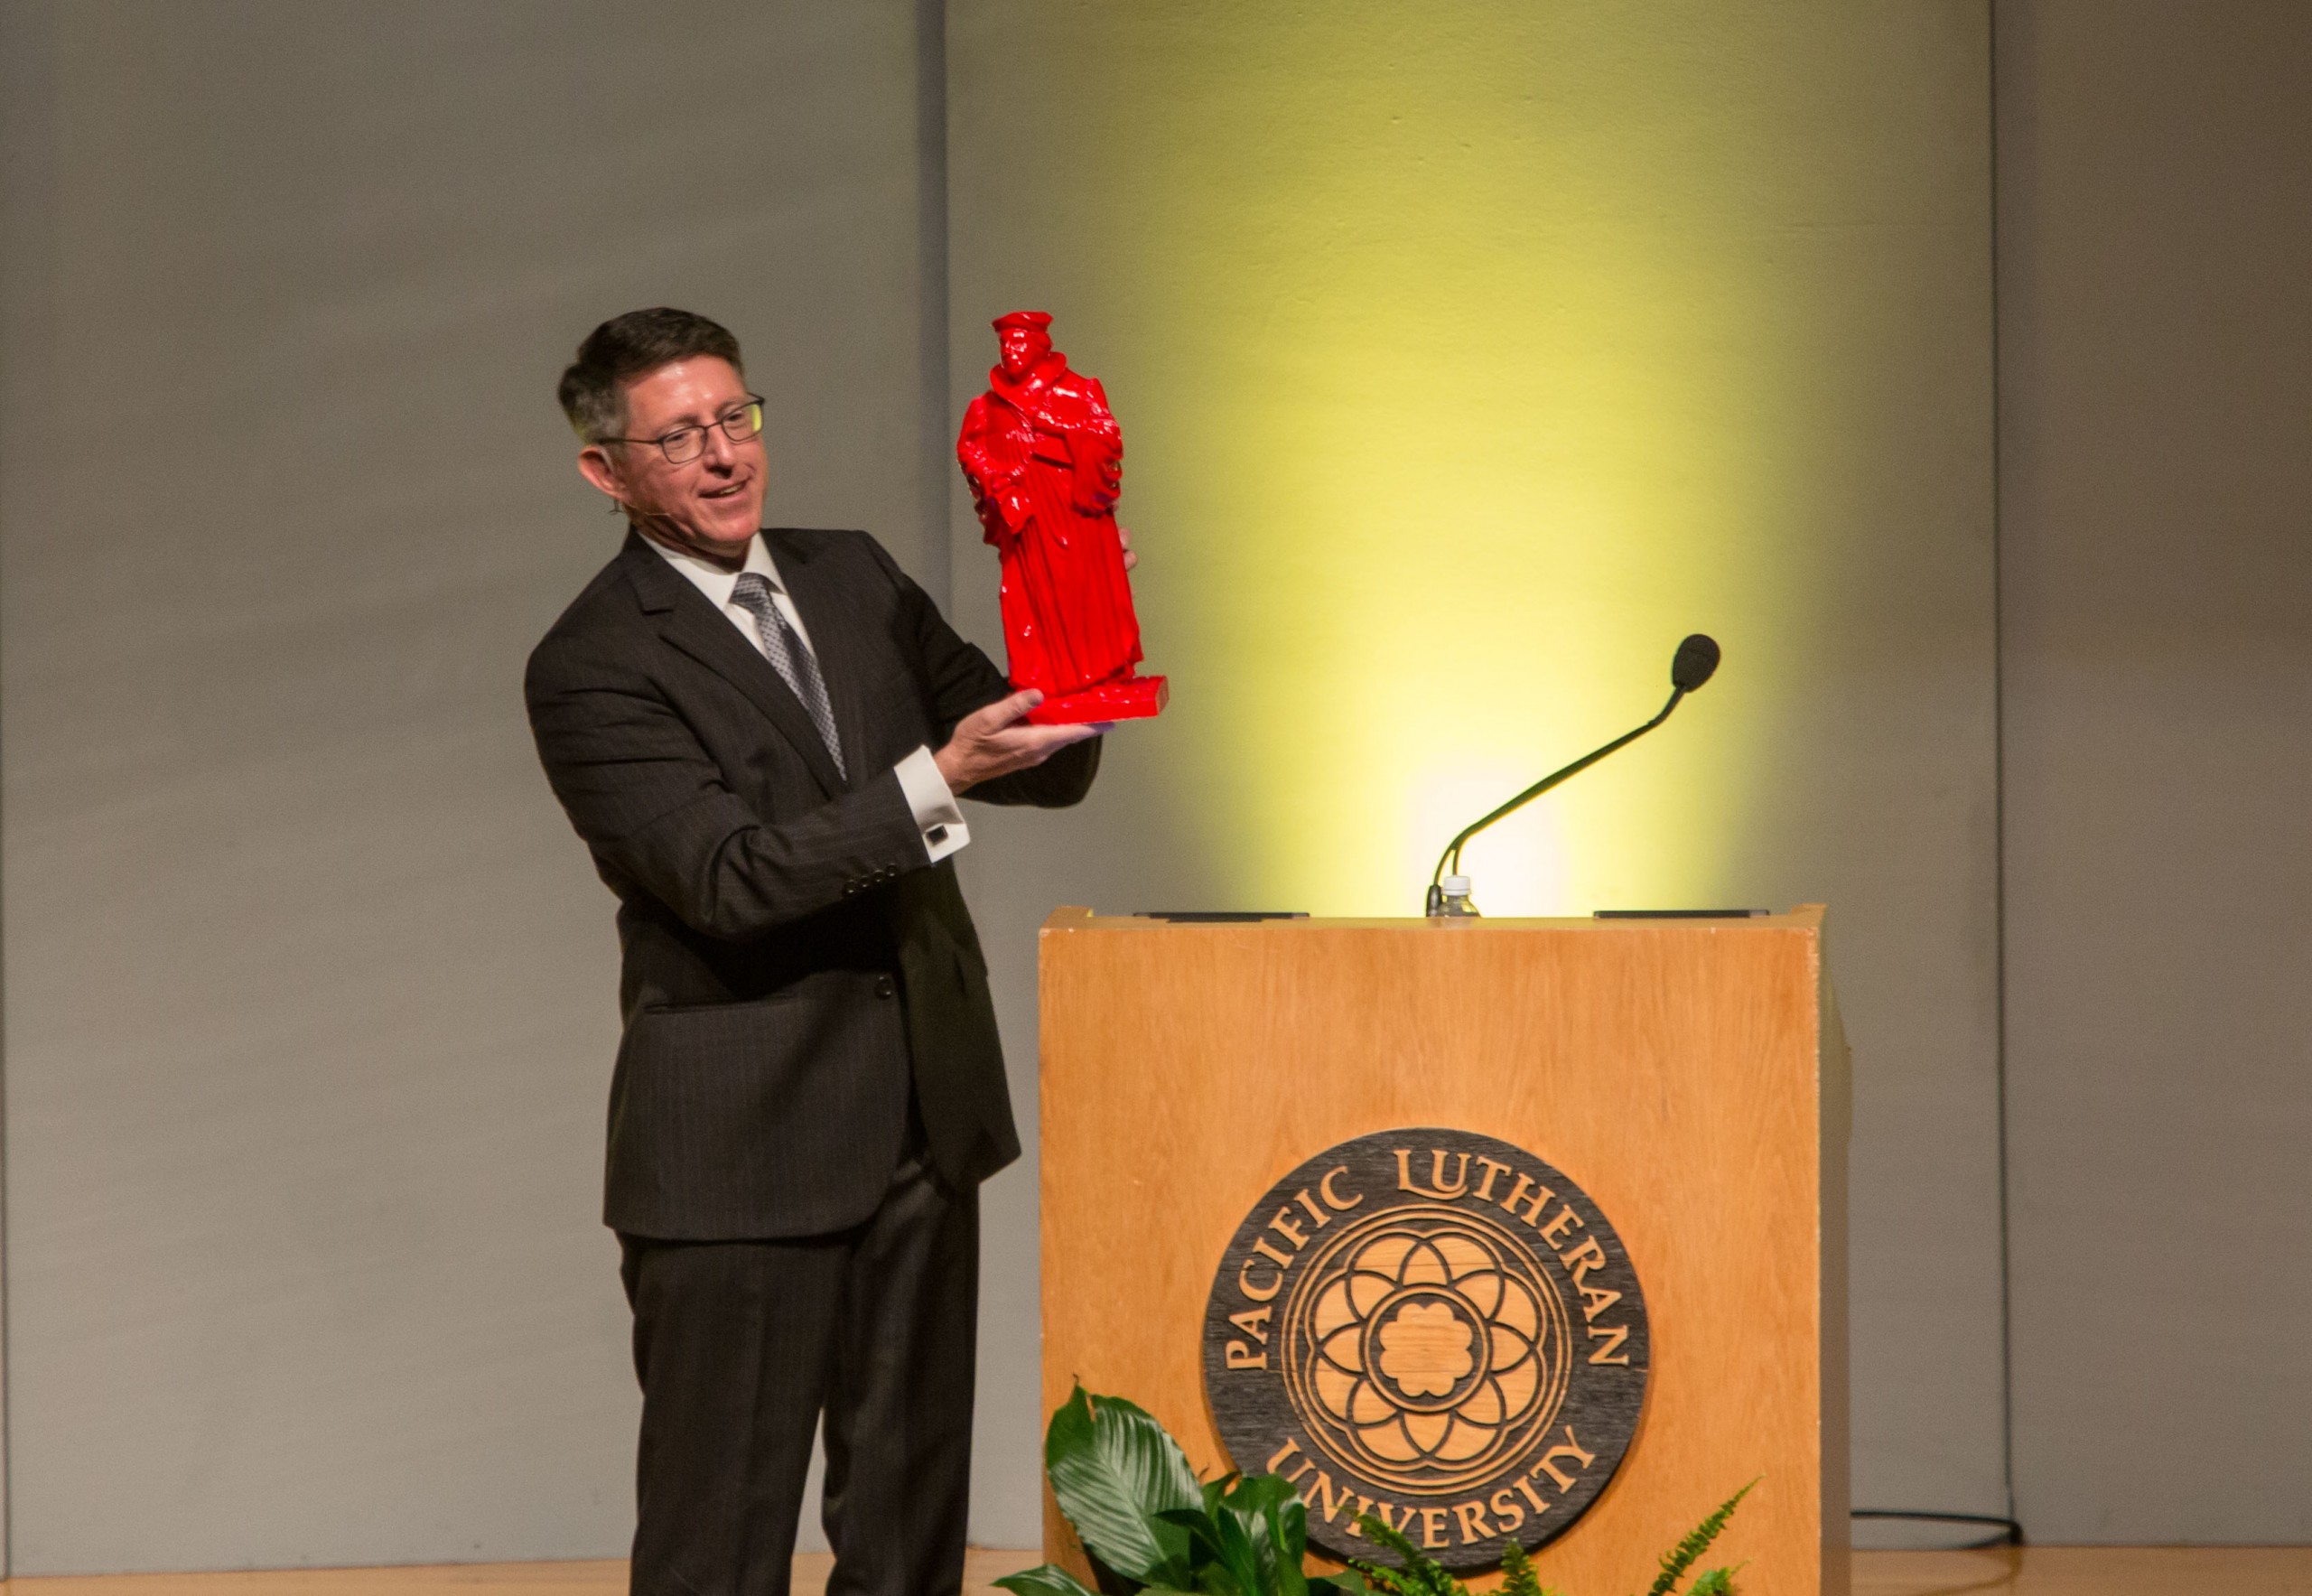 PLU President Thomas W. Krise speaks at University Conference on Wednesday, Aug. 31, unveiling one of the 21 Martin Luther statues that will be hidden around campus in October as part of the Re•forming series marking the 500th anniversary of the Reformation. (Photo: John Froschauer/PLU)